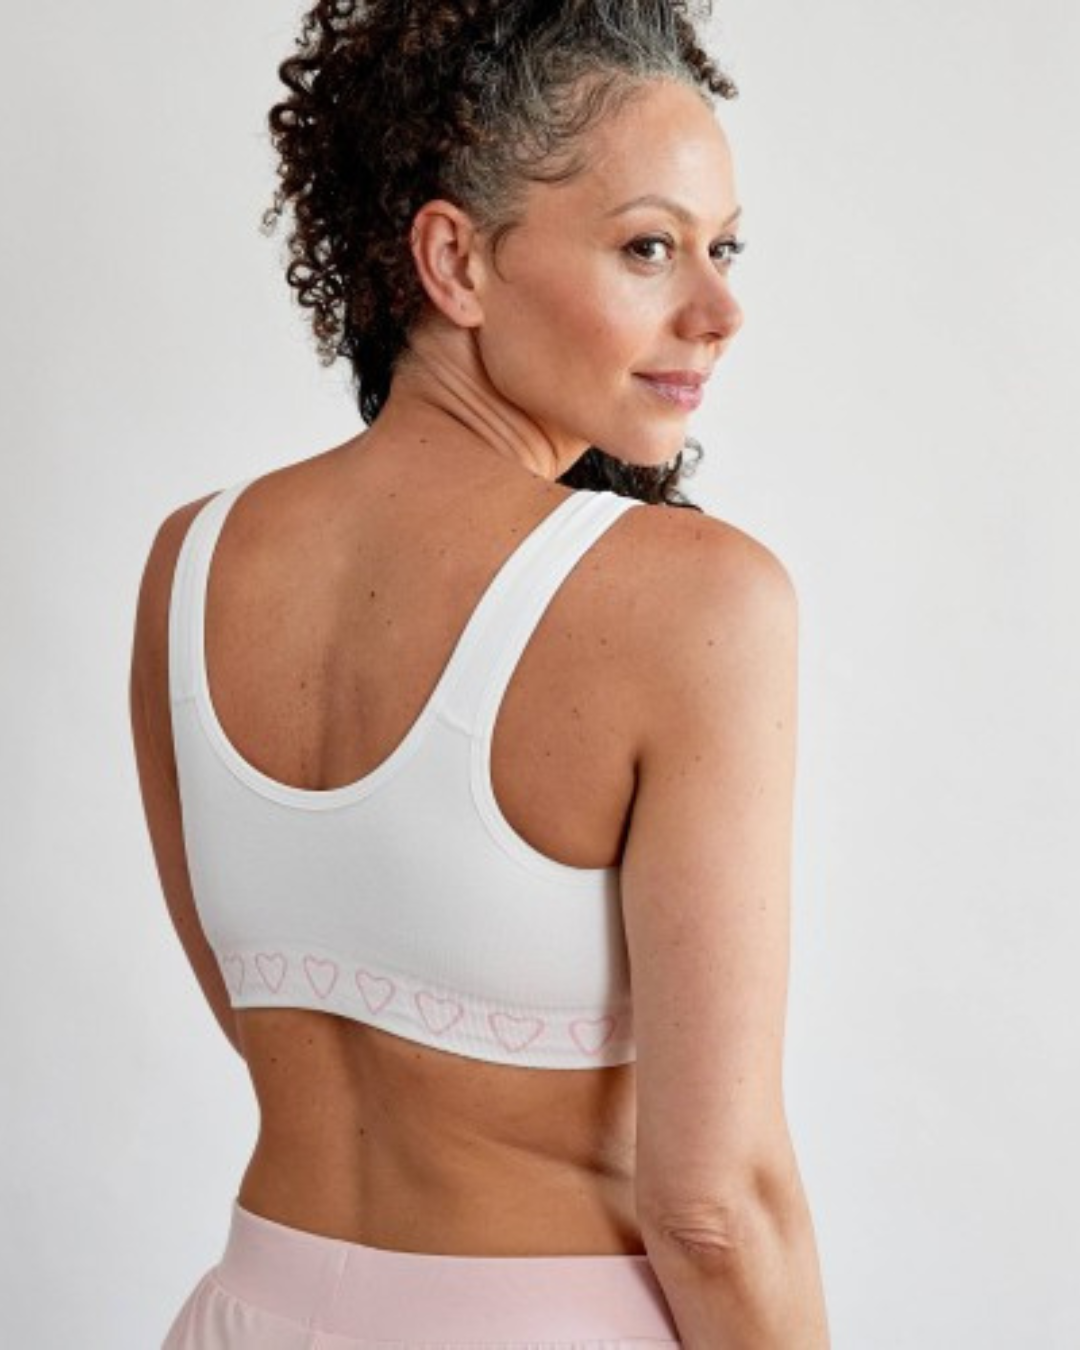 Cancer Research UK Post-Surgery Comfort Bra - Soft bamboo fabric bra designed for breast cancer patients. Offers comfort and support after mastectomy or breast cancer surgery. Available in white, black, and blush. Sizes range from Small to XXL. 100% net profits fund breast cancer research.